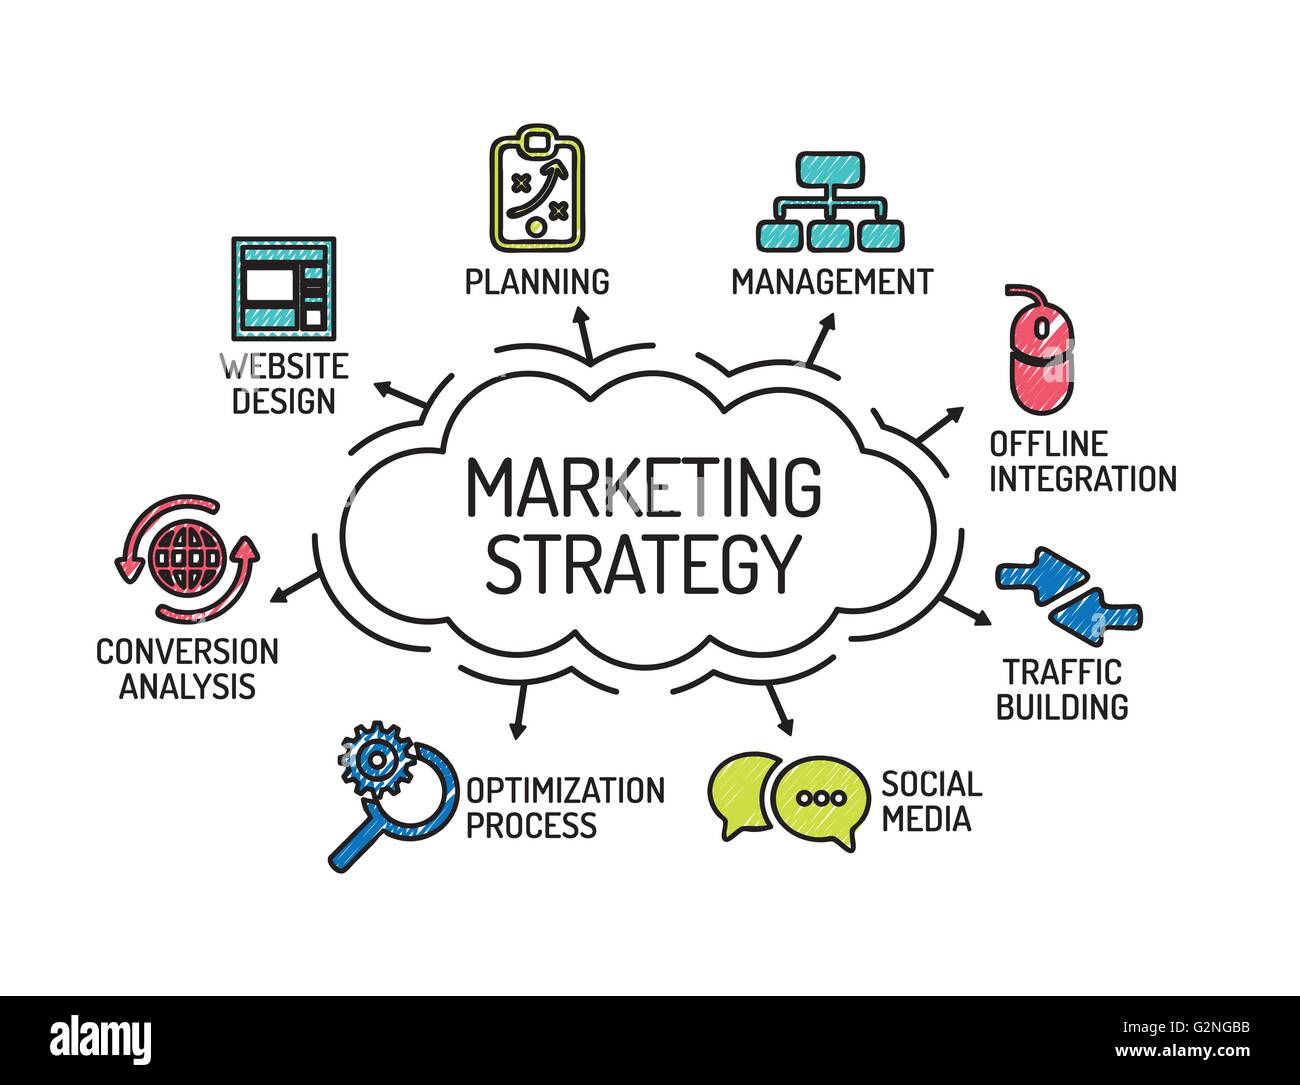 Marketing Strategy. Chart with keywords and icons. Sketch Stock Vector